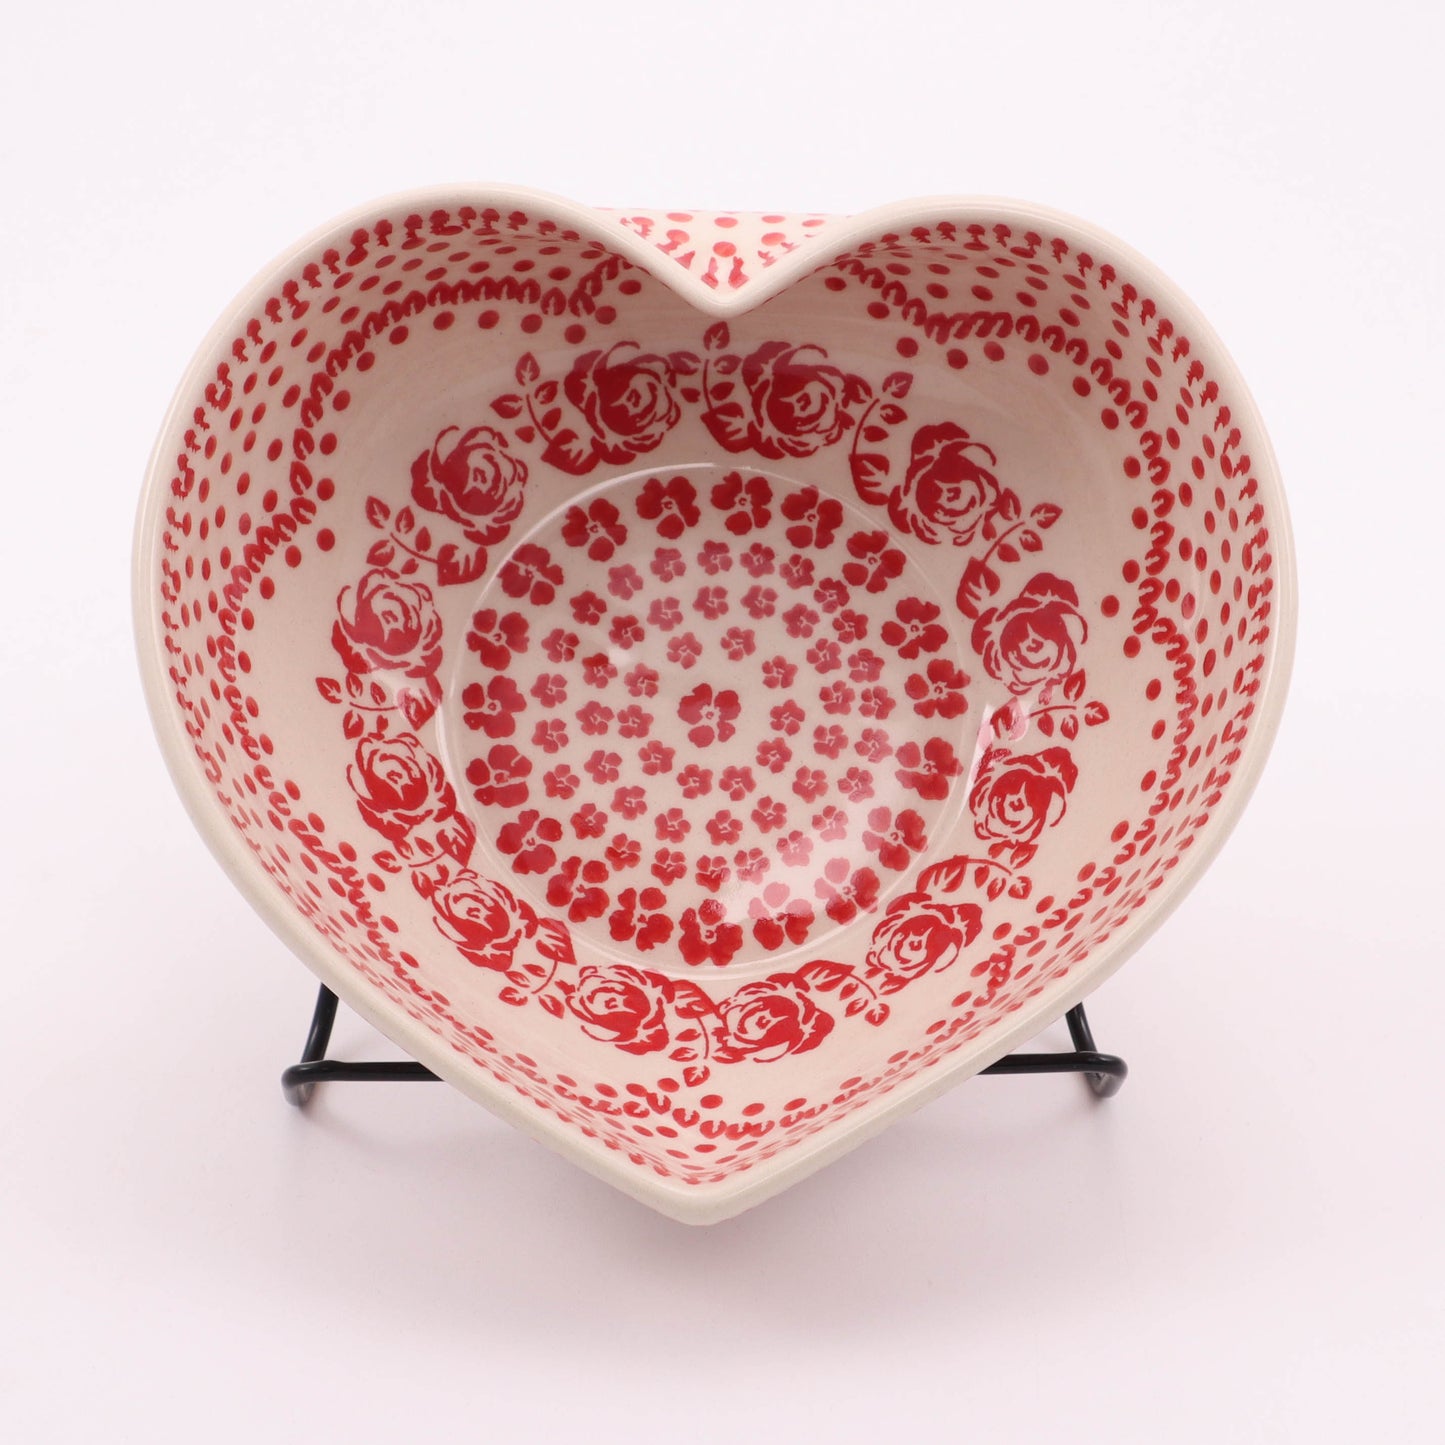 7"x6.5" Heart Bowl. Pattern: Country Rose